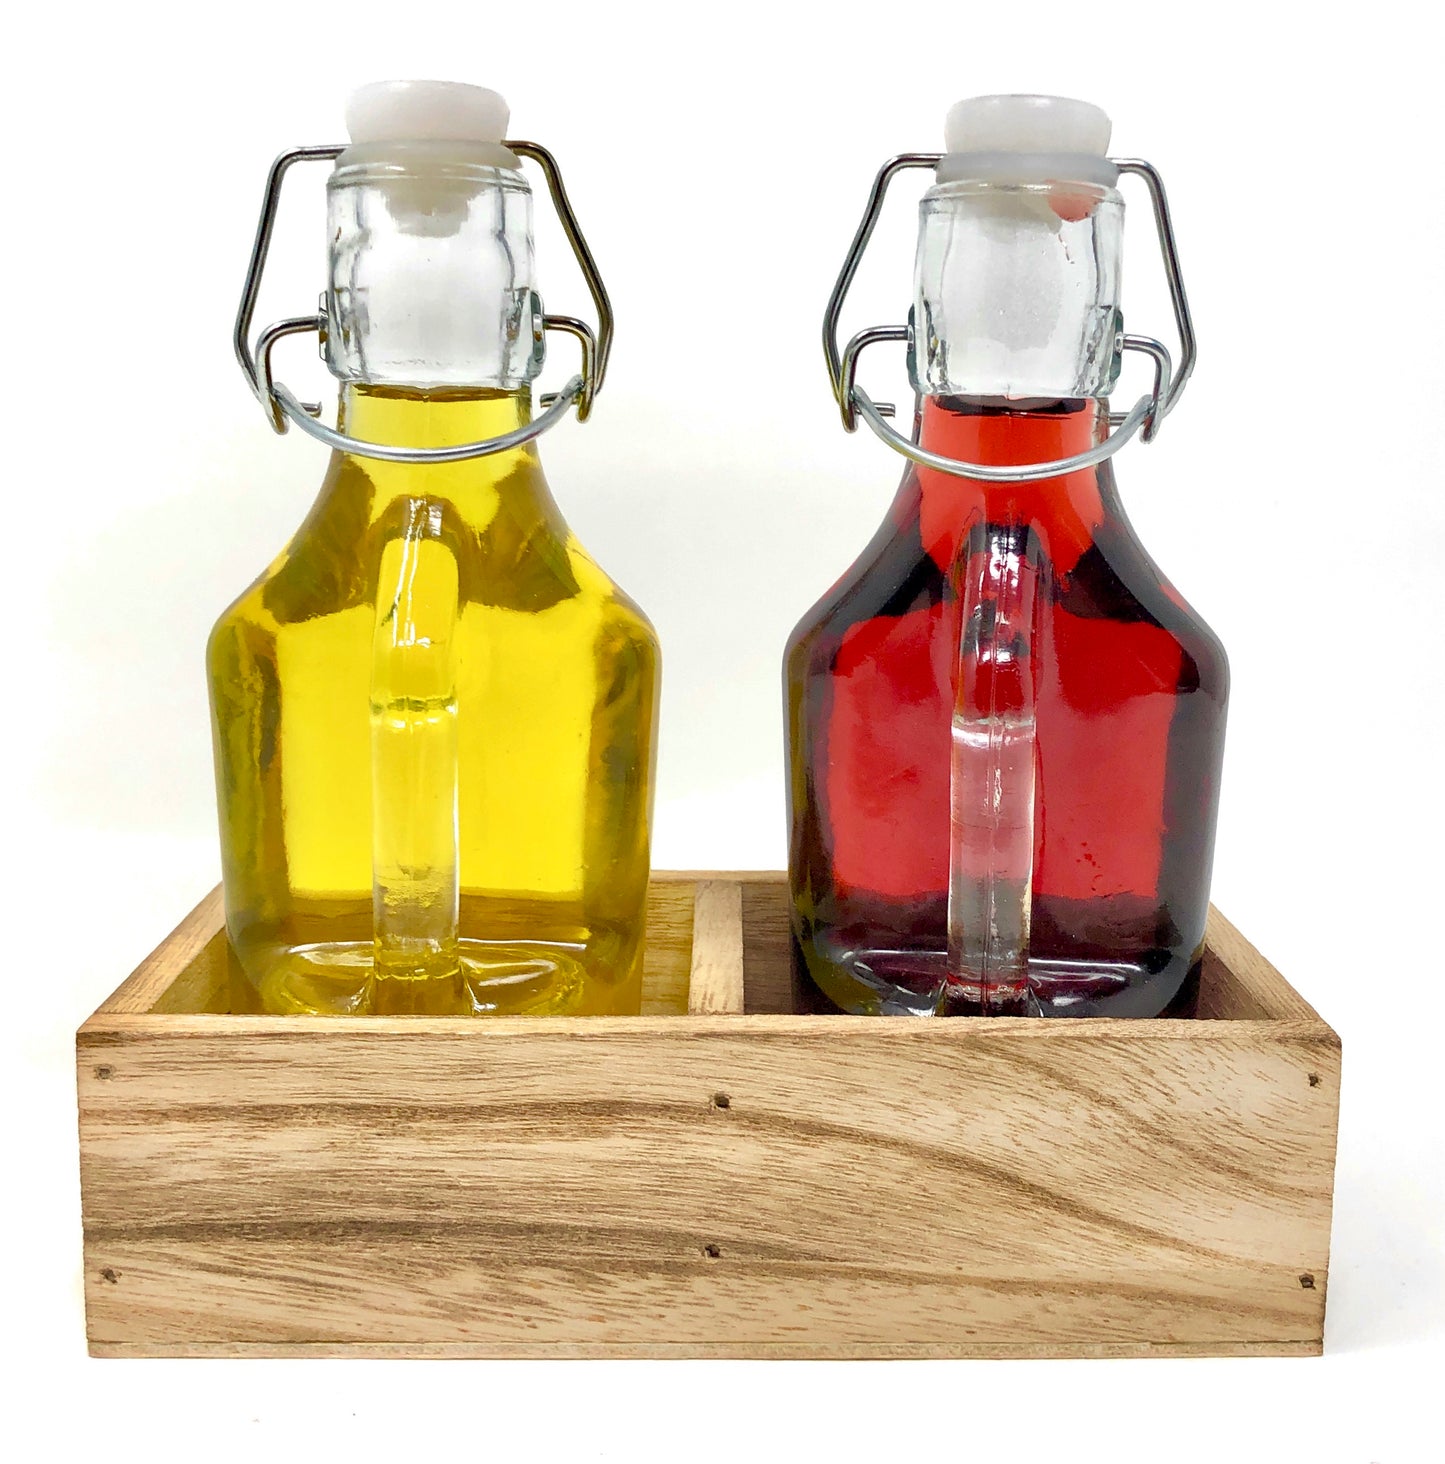 Oil and Vinegar Dispenser Set Cruet Glass Bottles with Swing Top and Wood Caddy for Salad Dressing Condiments, Rustic and Farmhouse Kitchen Decor